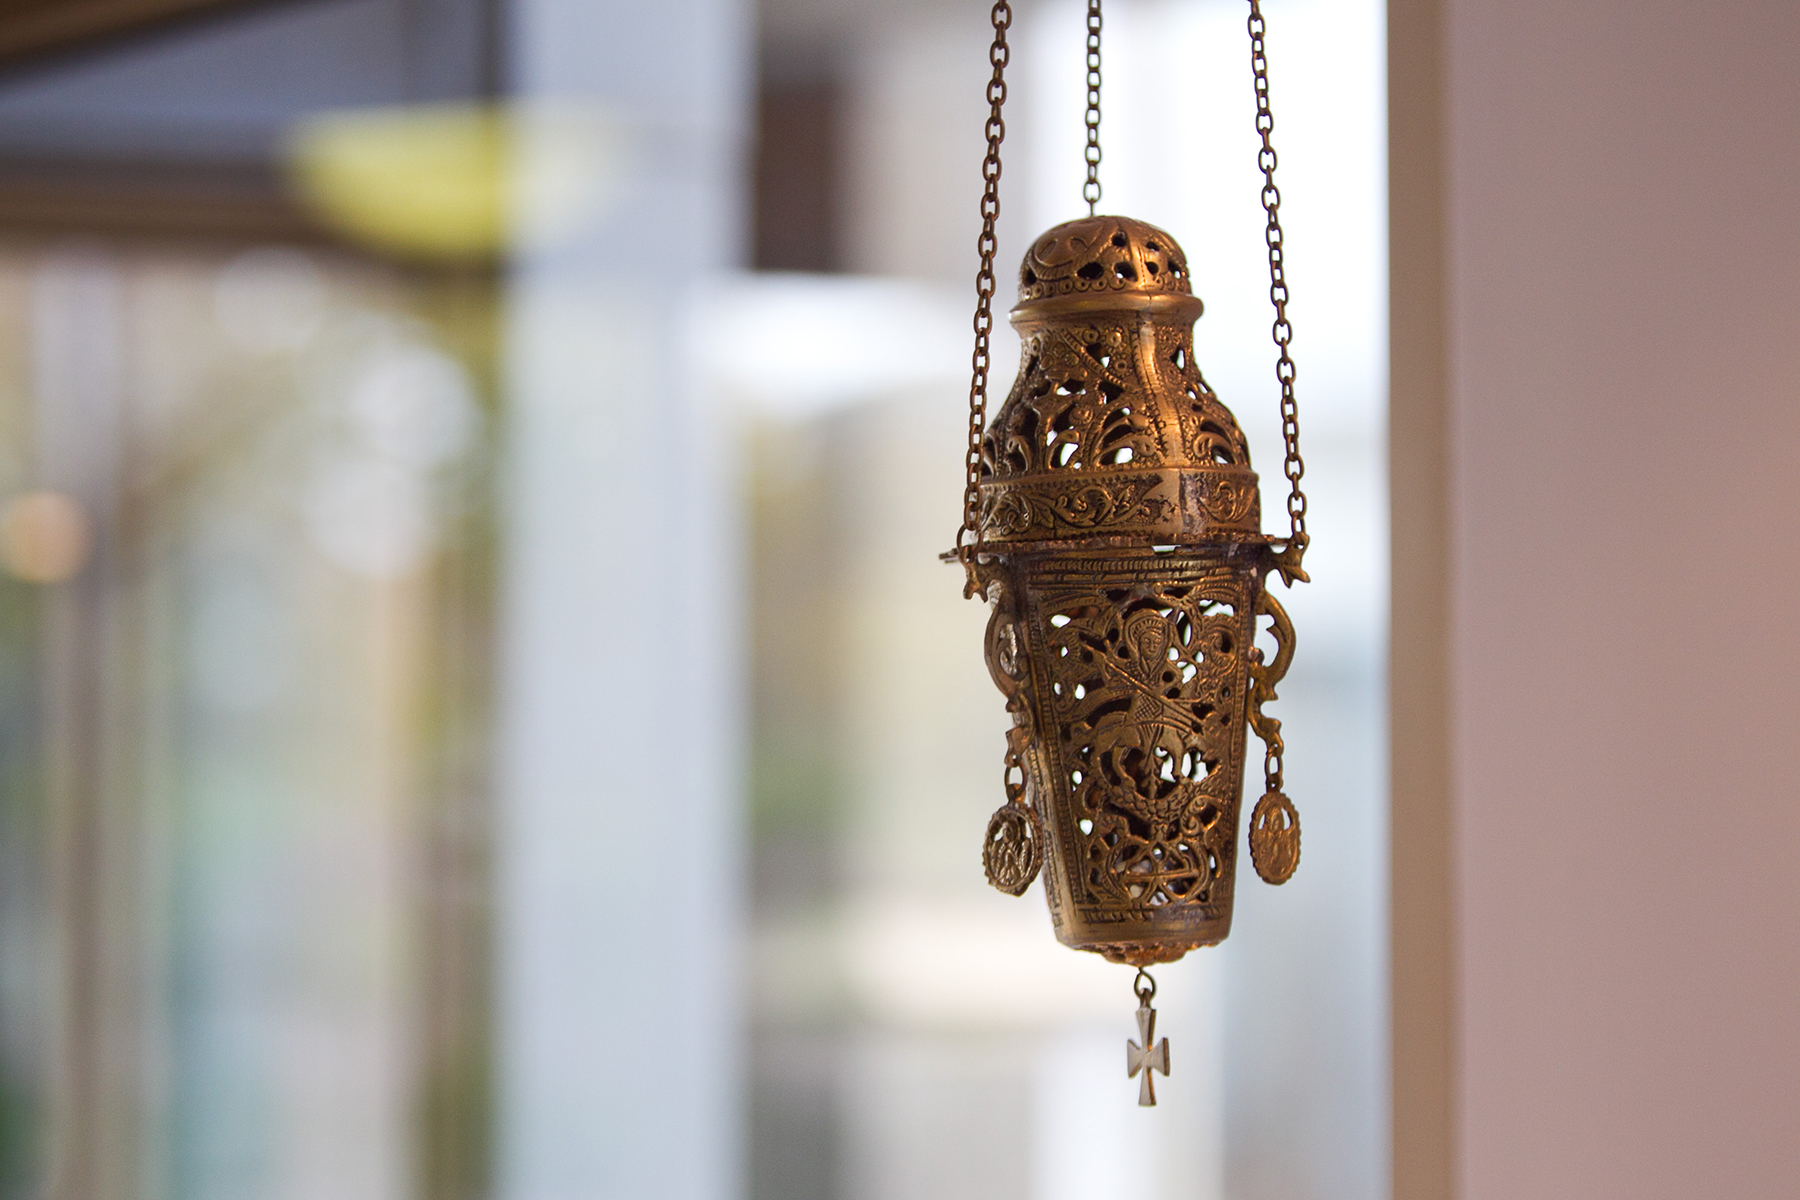 incense holder hanging by a window in the level 3 foyer of the Thomas Carr Centre